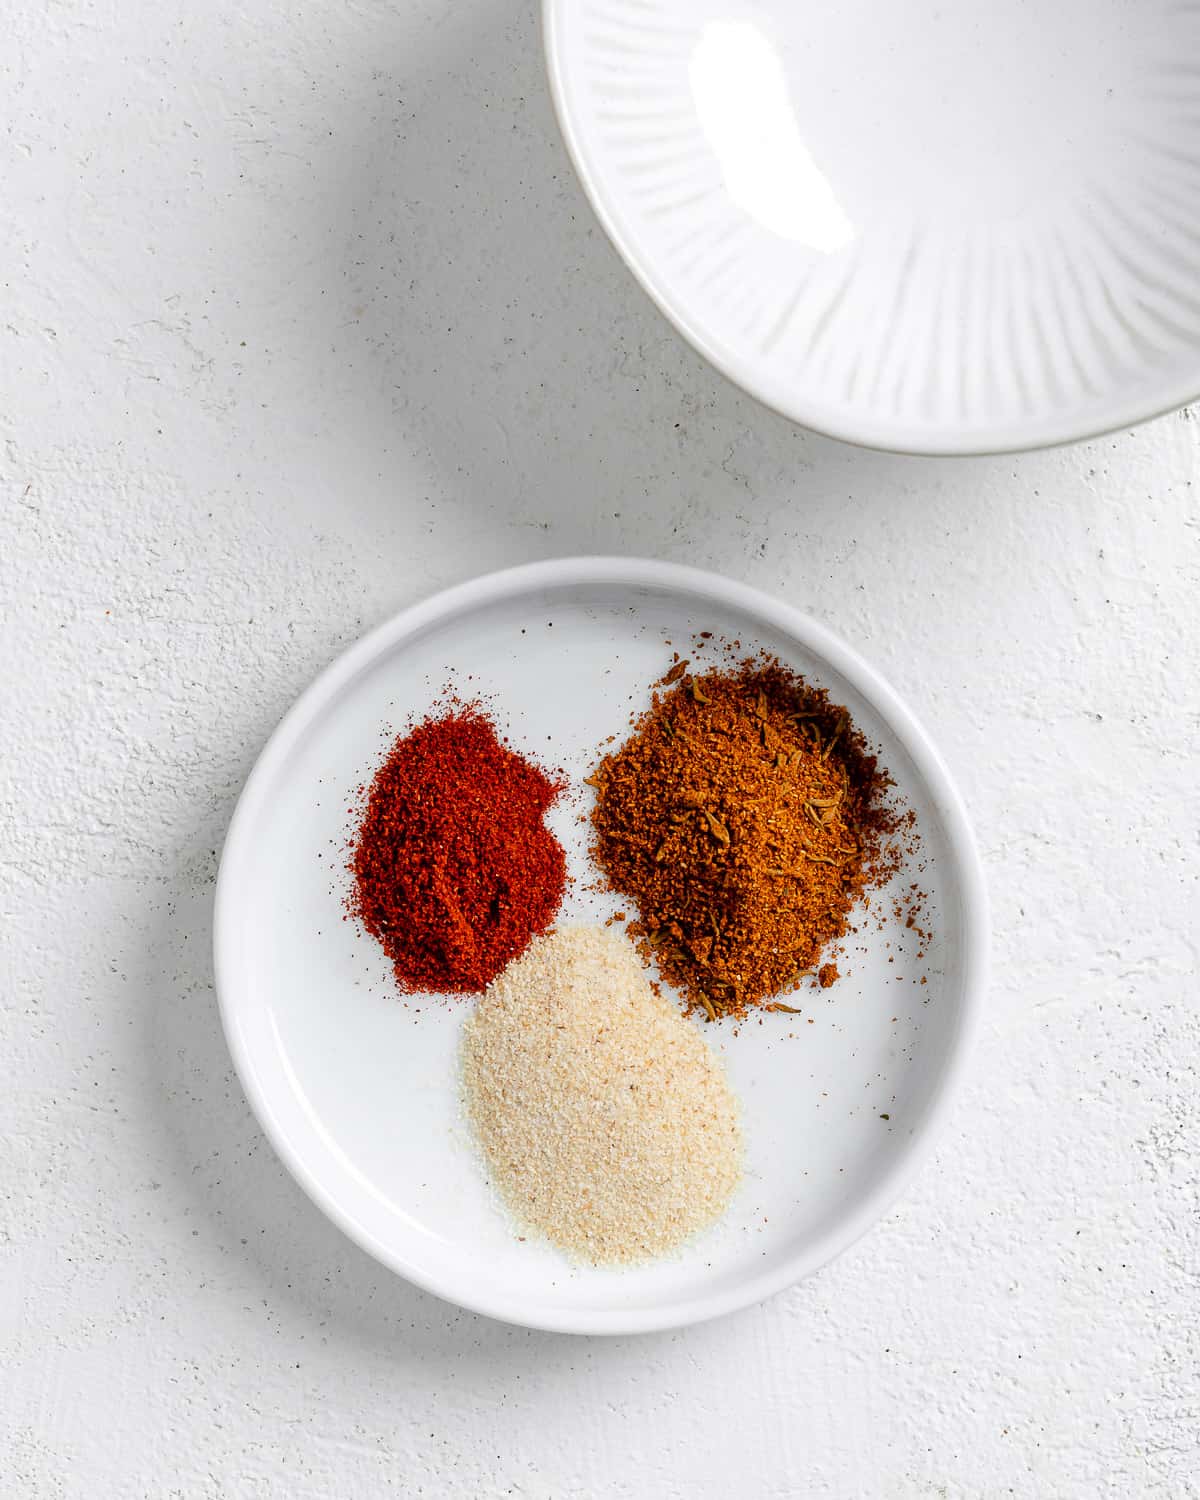 measured out spices in a white dish against a white background